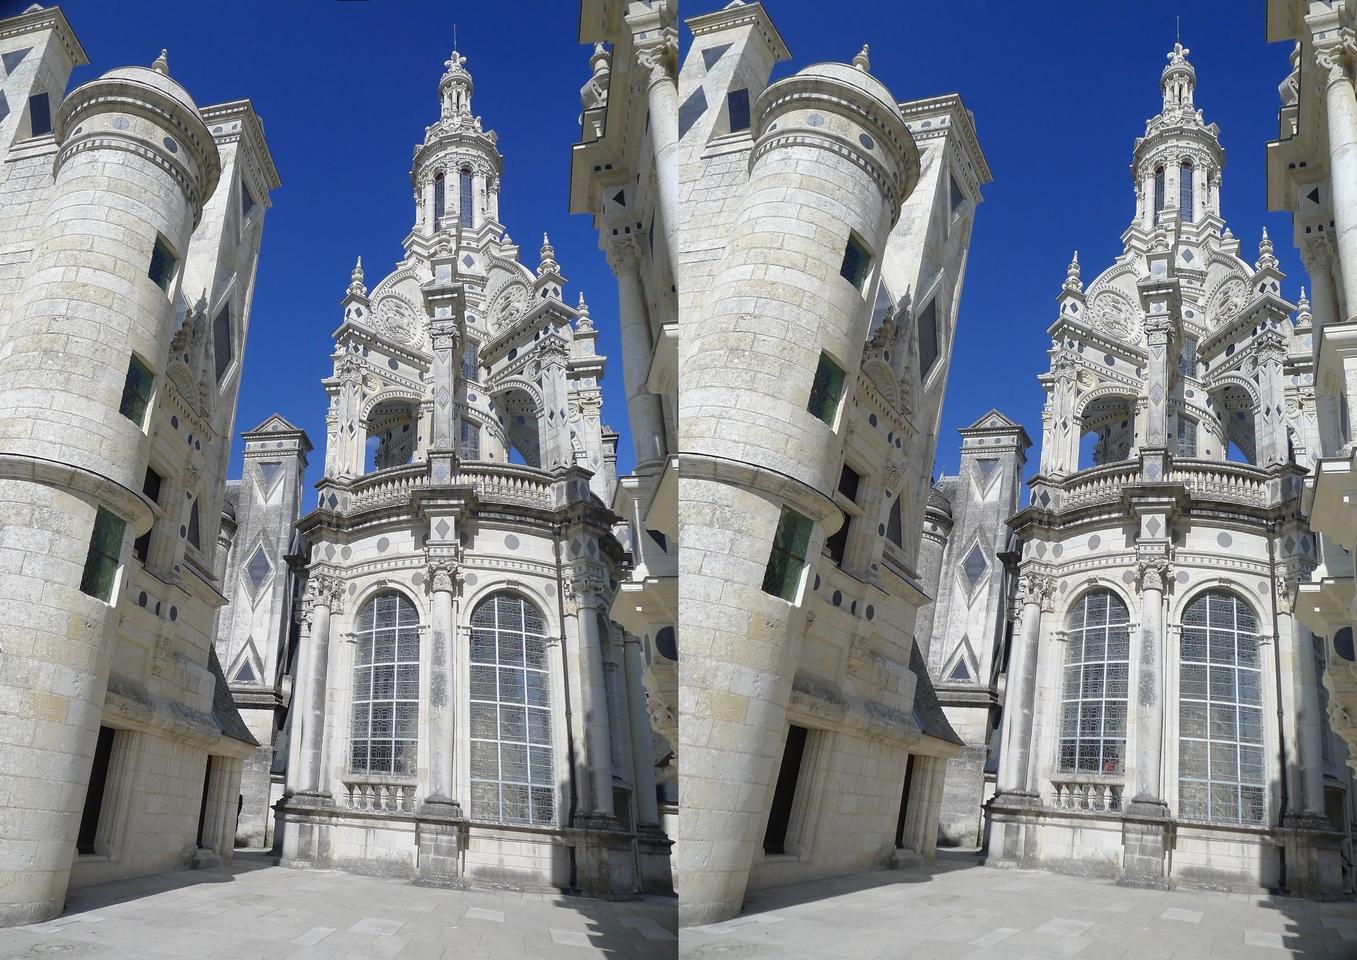 Tower of the double-spiral staircase, Chambord